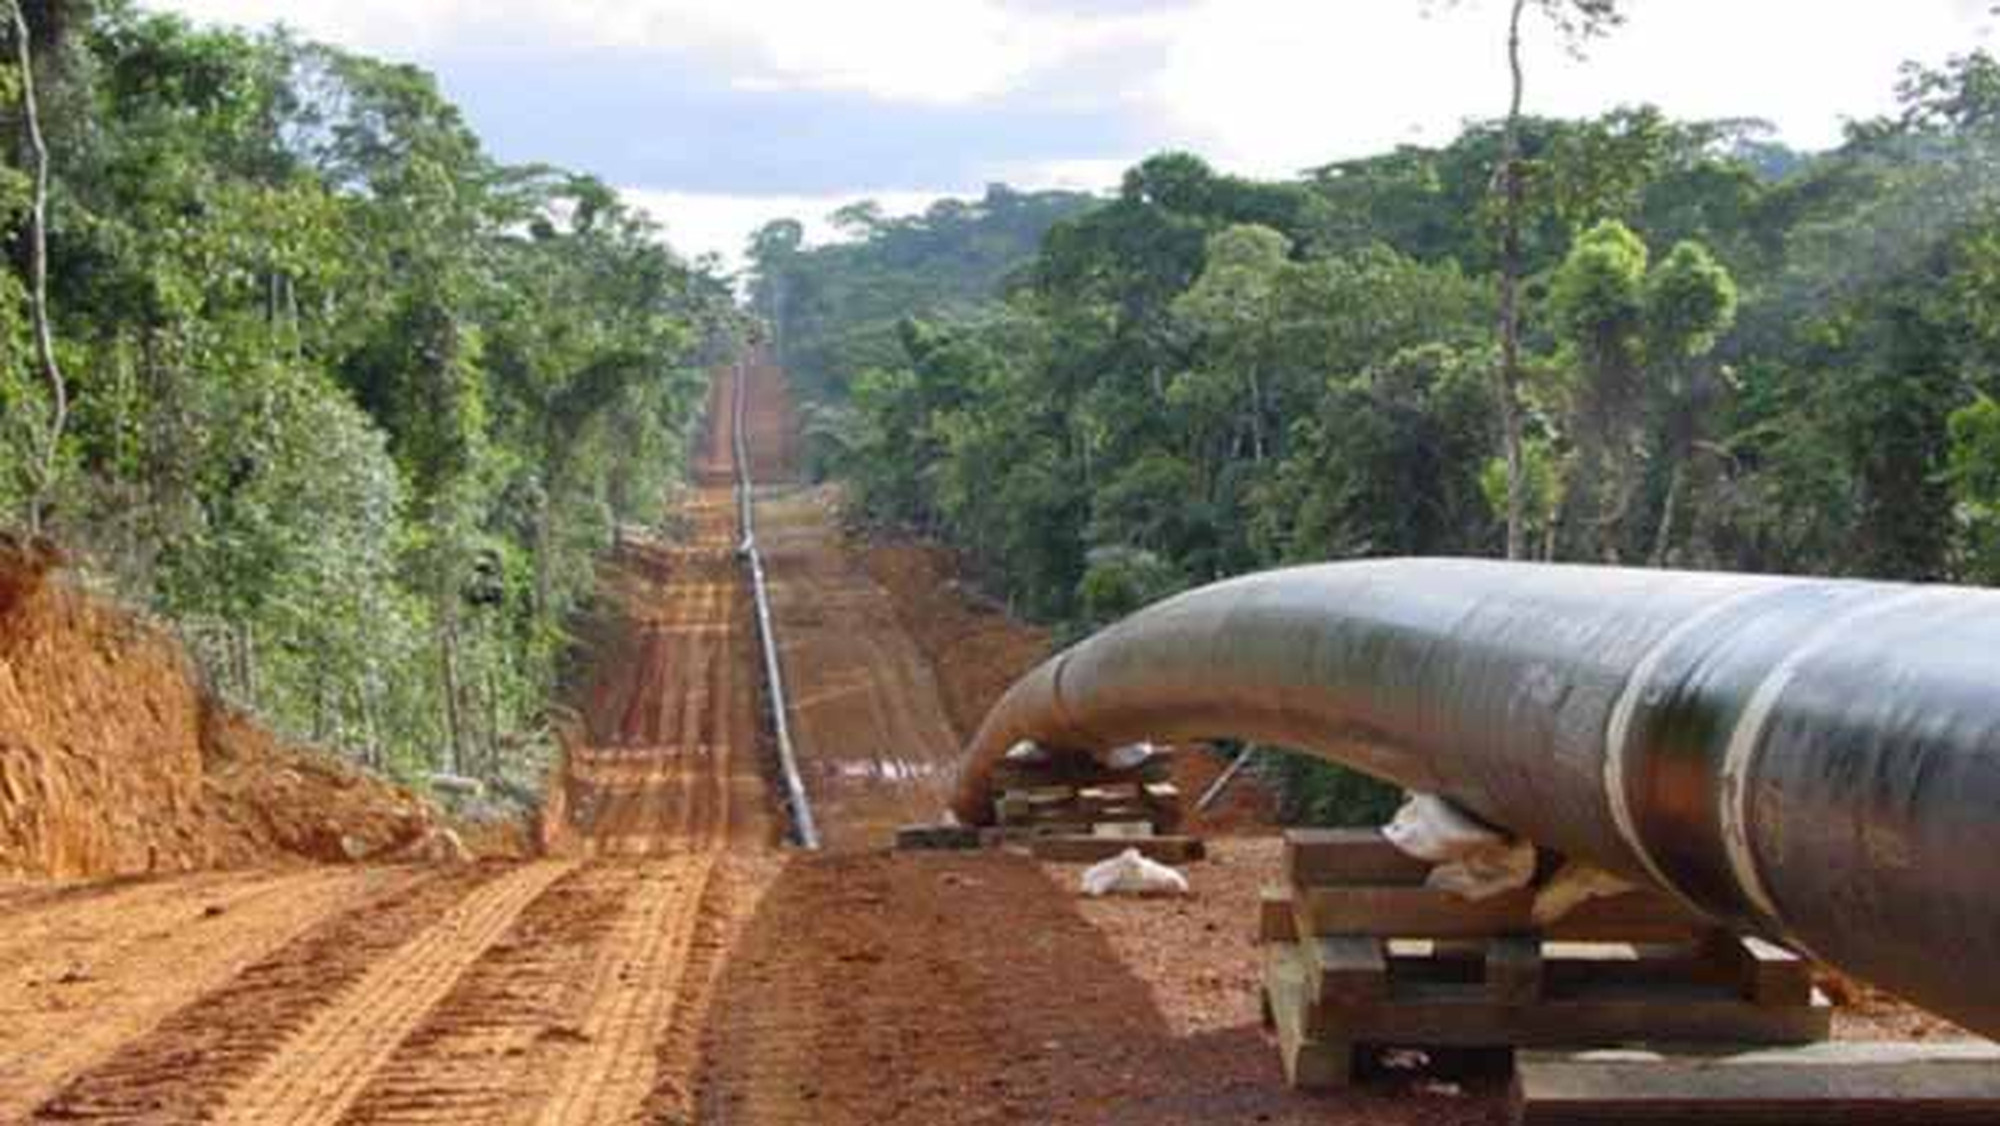 The East African Crude Oil Pipeline has faced repeated delays and is a lightning rod for environmental and human rights activists. Photo: Handout